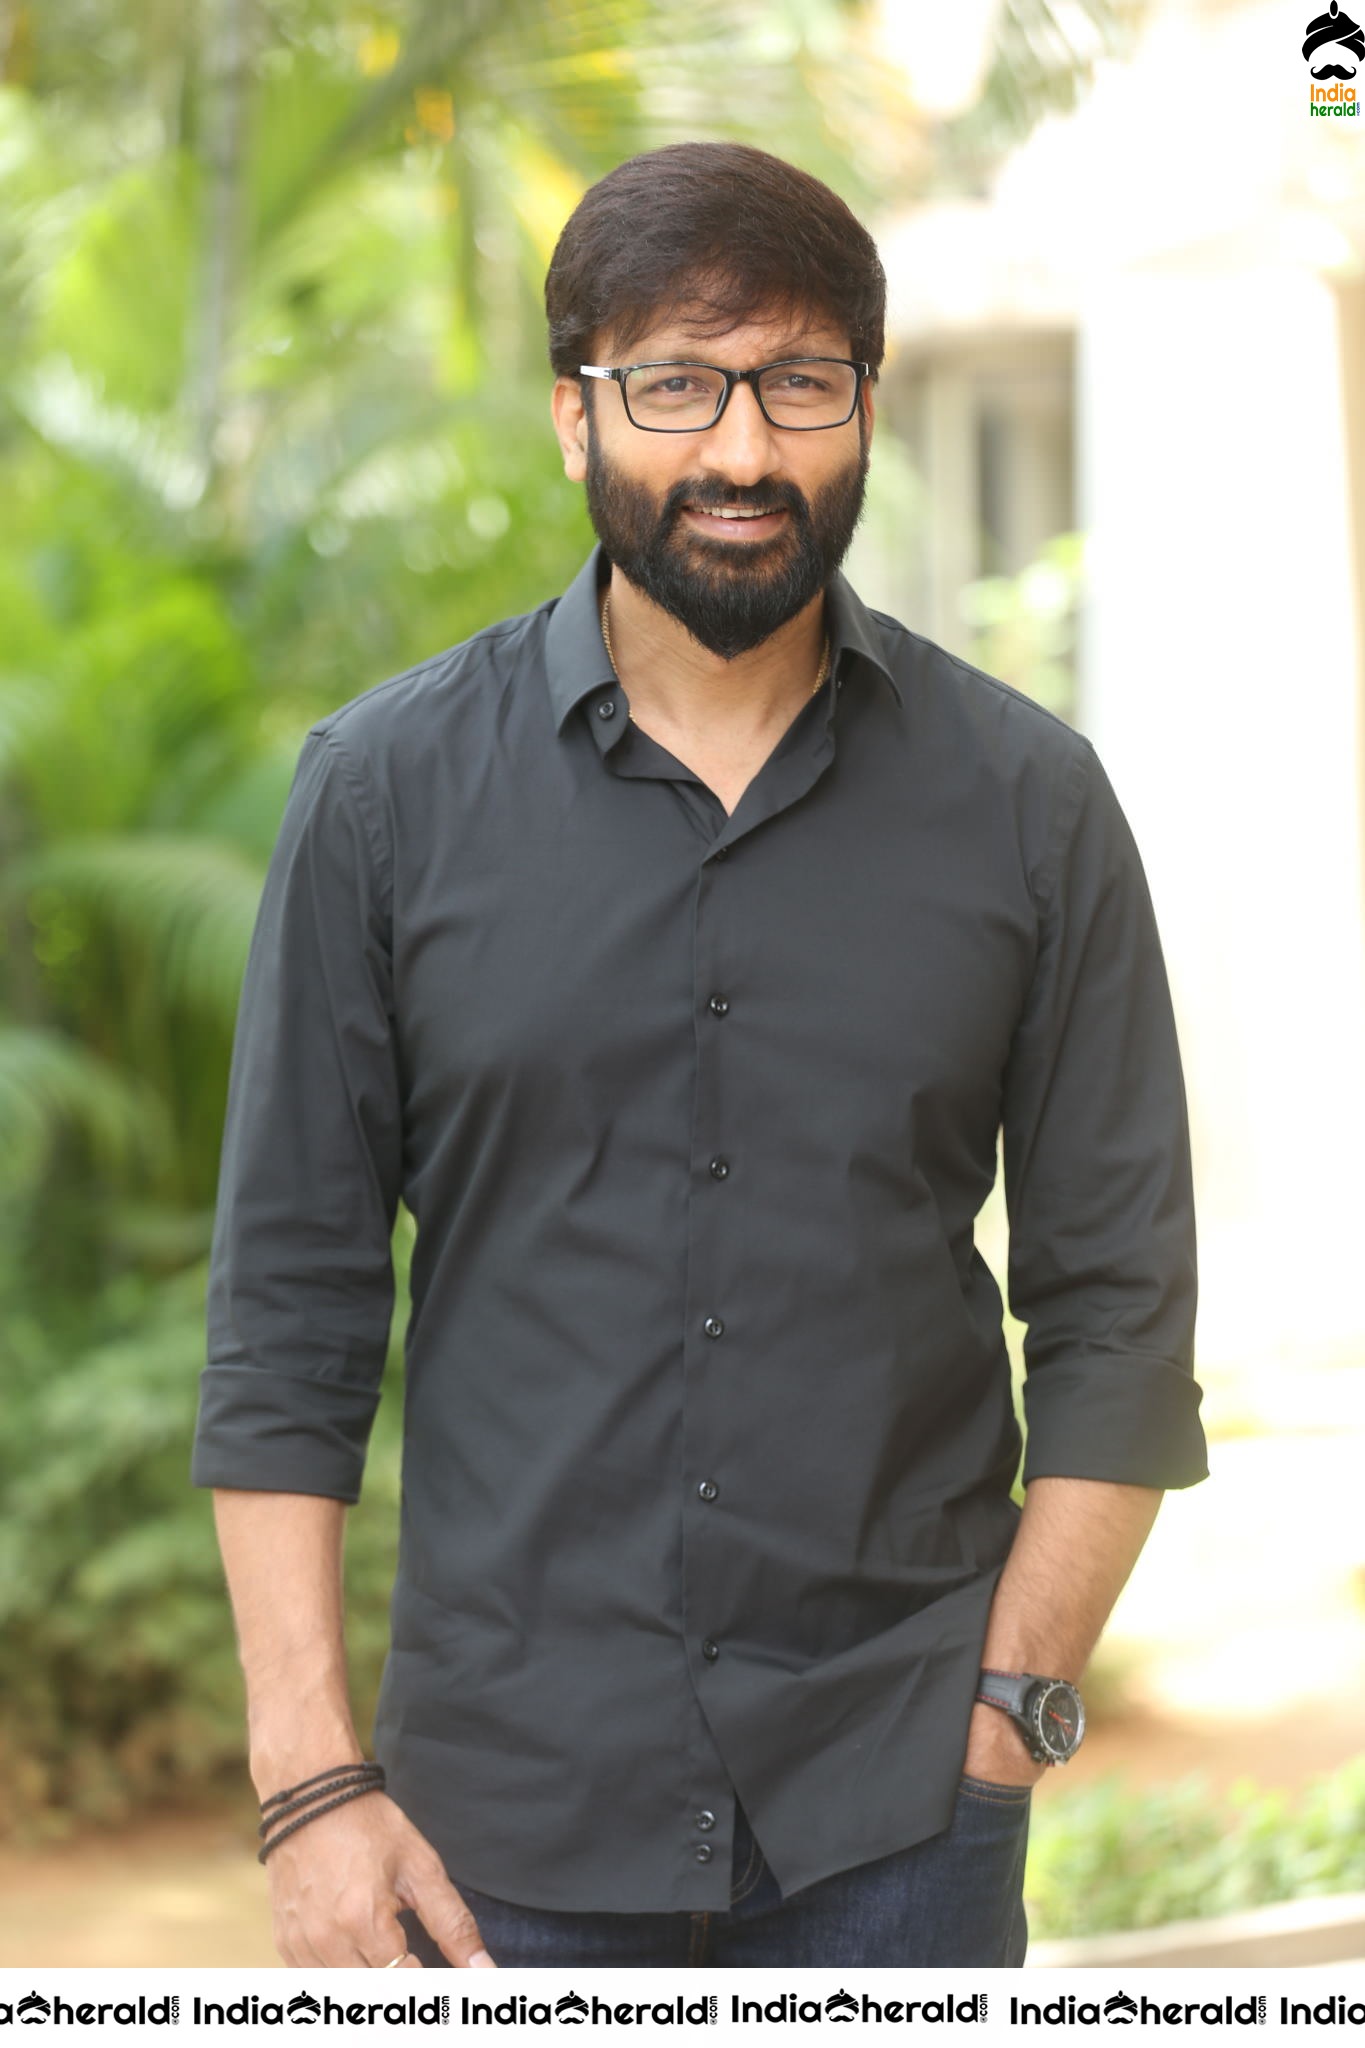 Actor Gopichand Latest Clicks with Nerd Glasses and Thick Beard Set 2